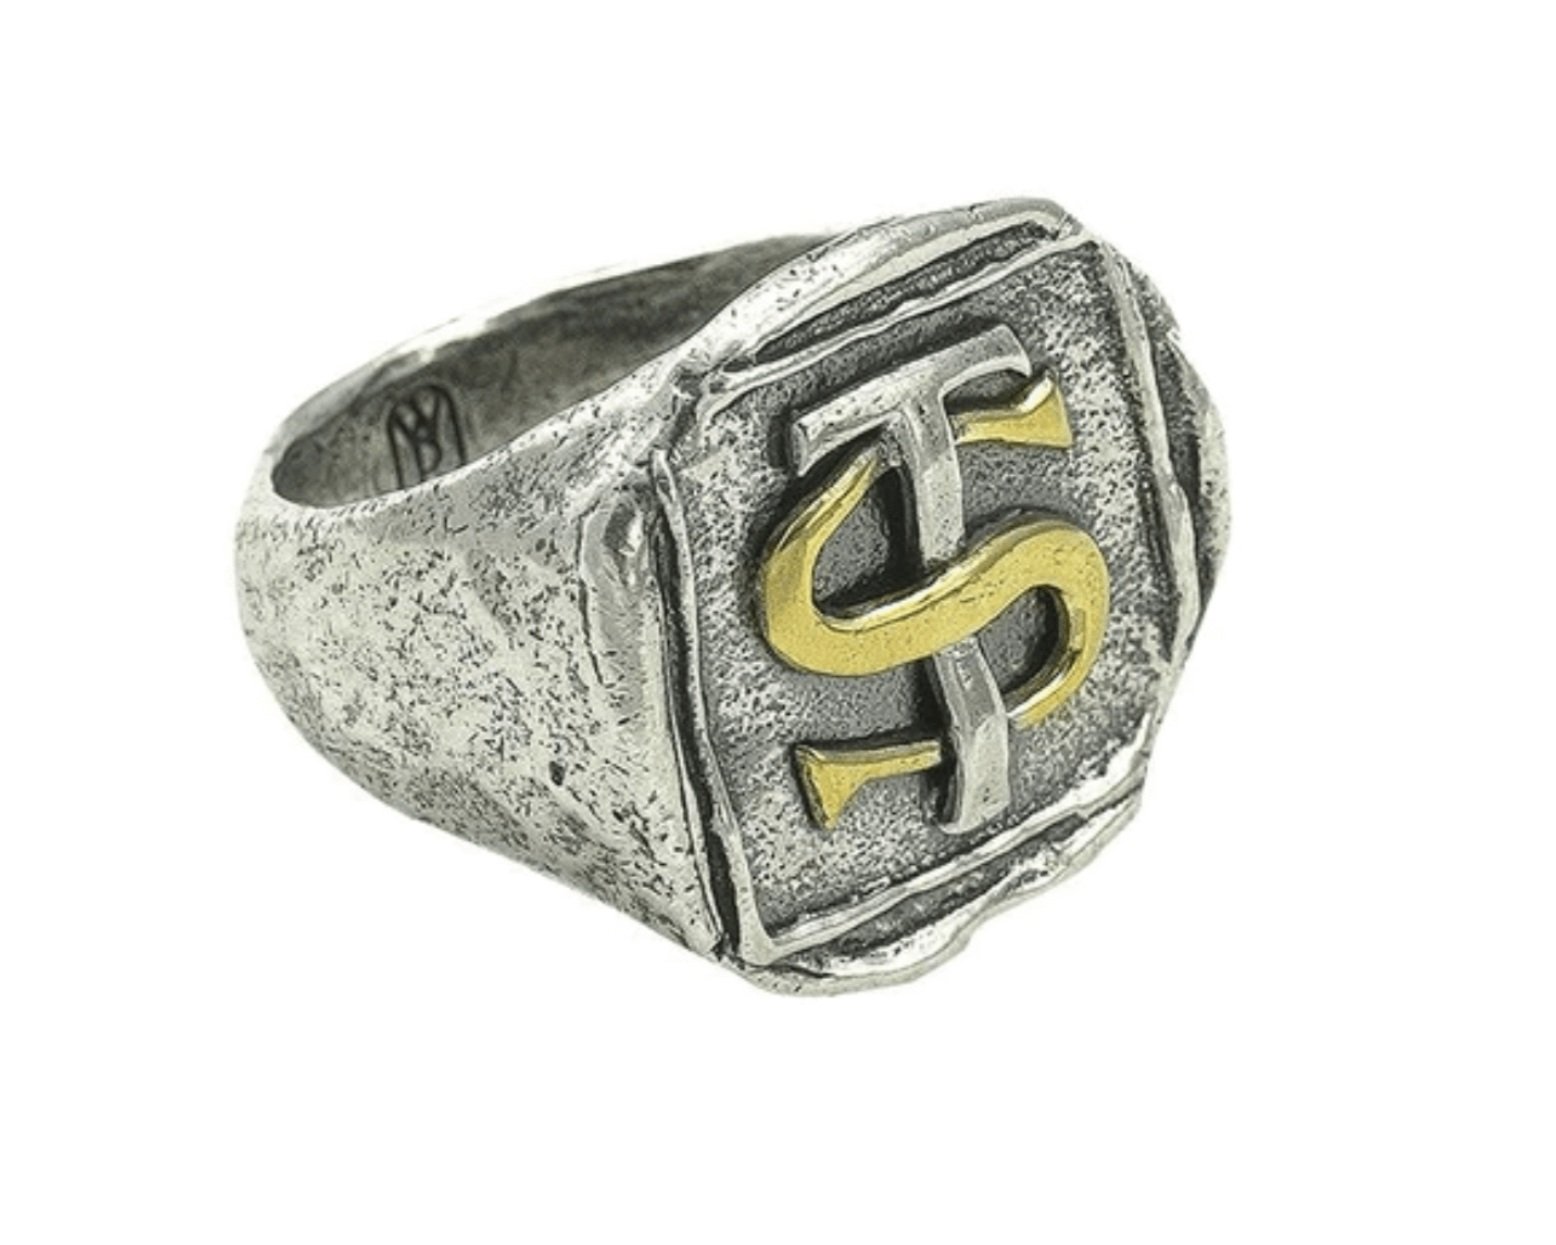 Intertwined Initials Ring - Sterling Silver and Brass, $165 at Waxing Poetic